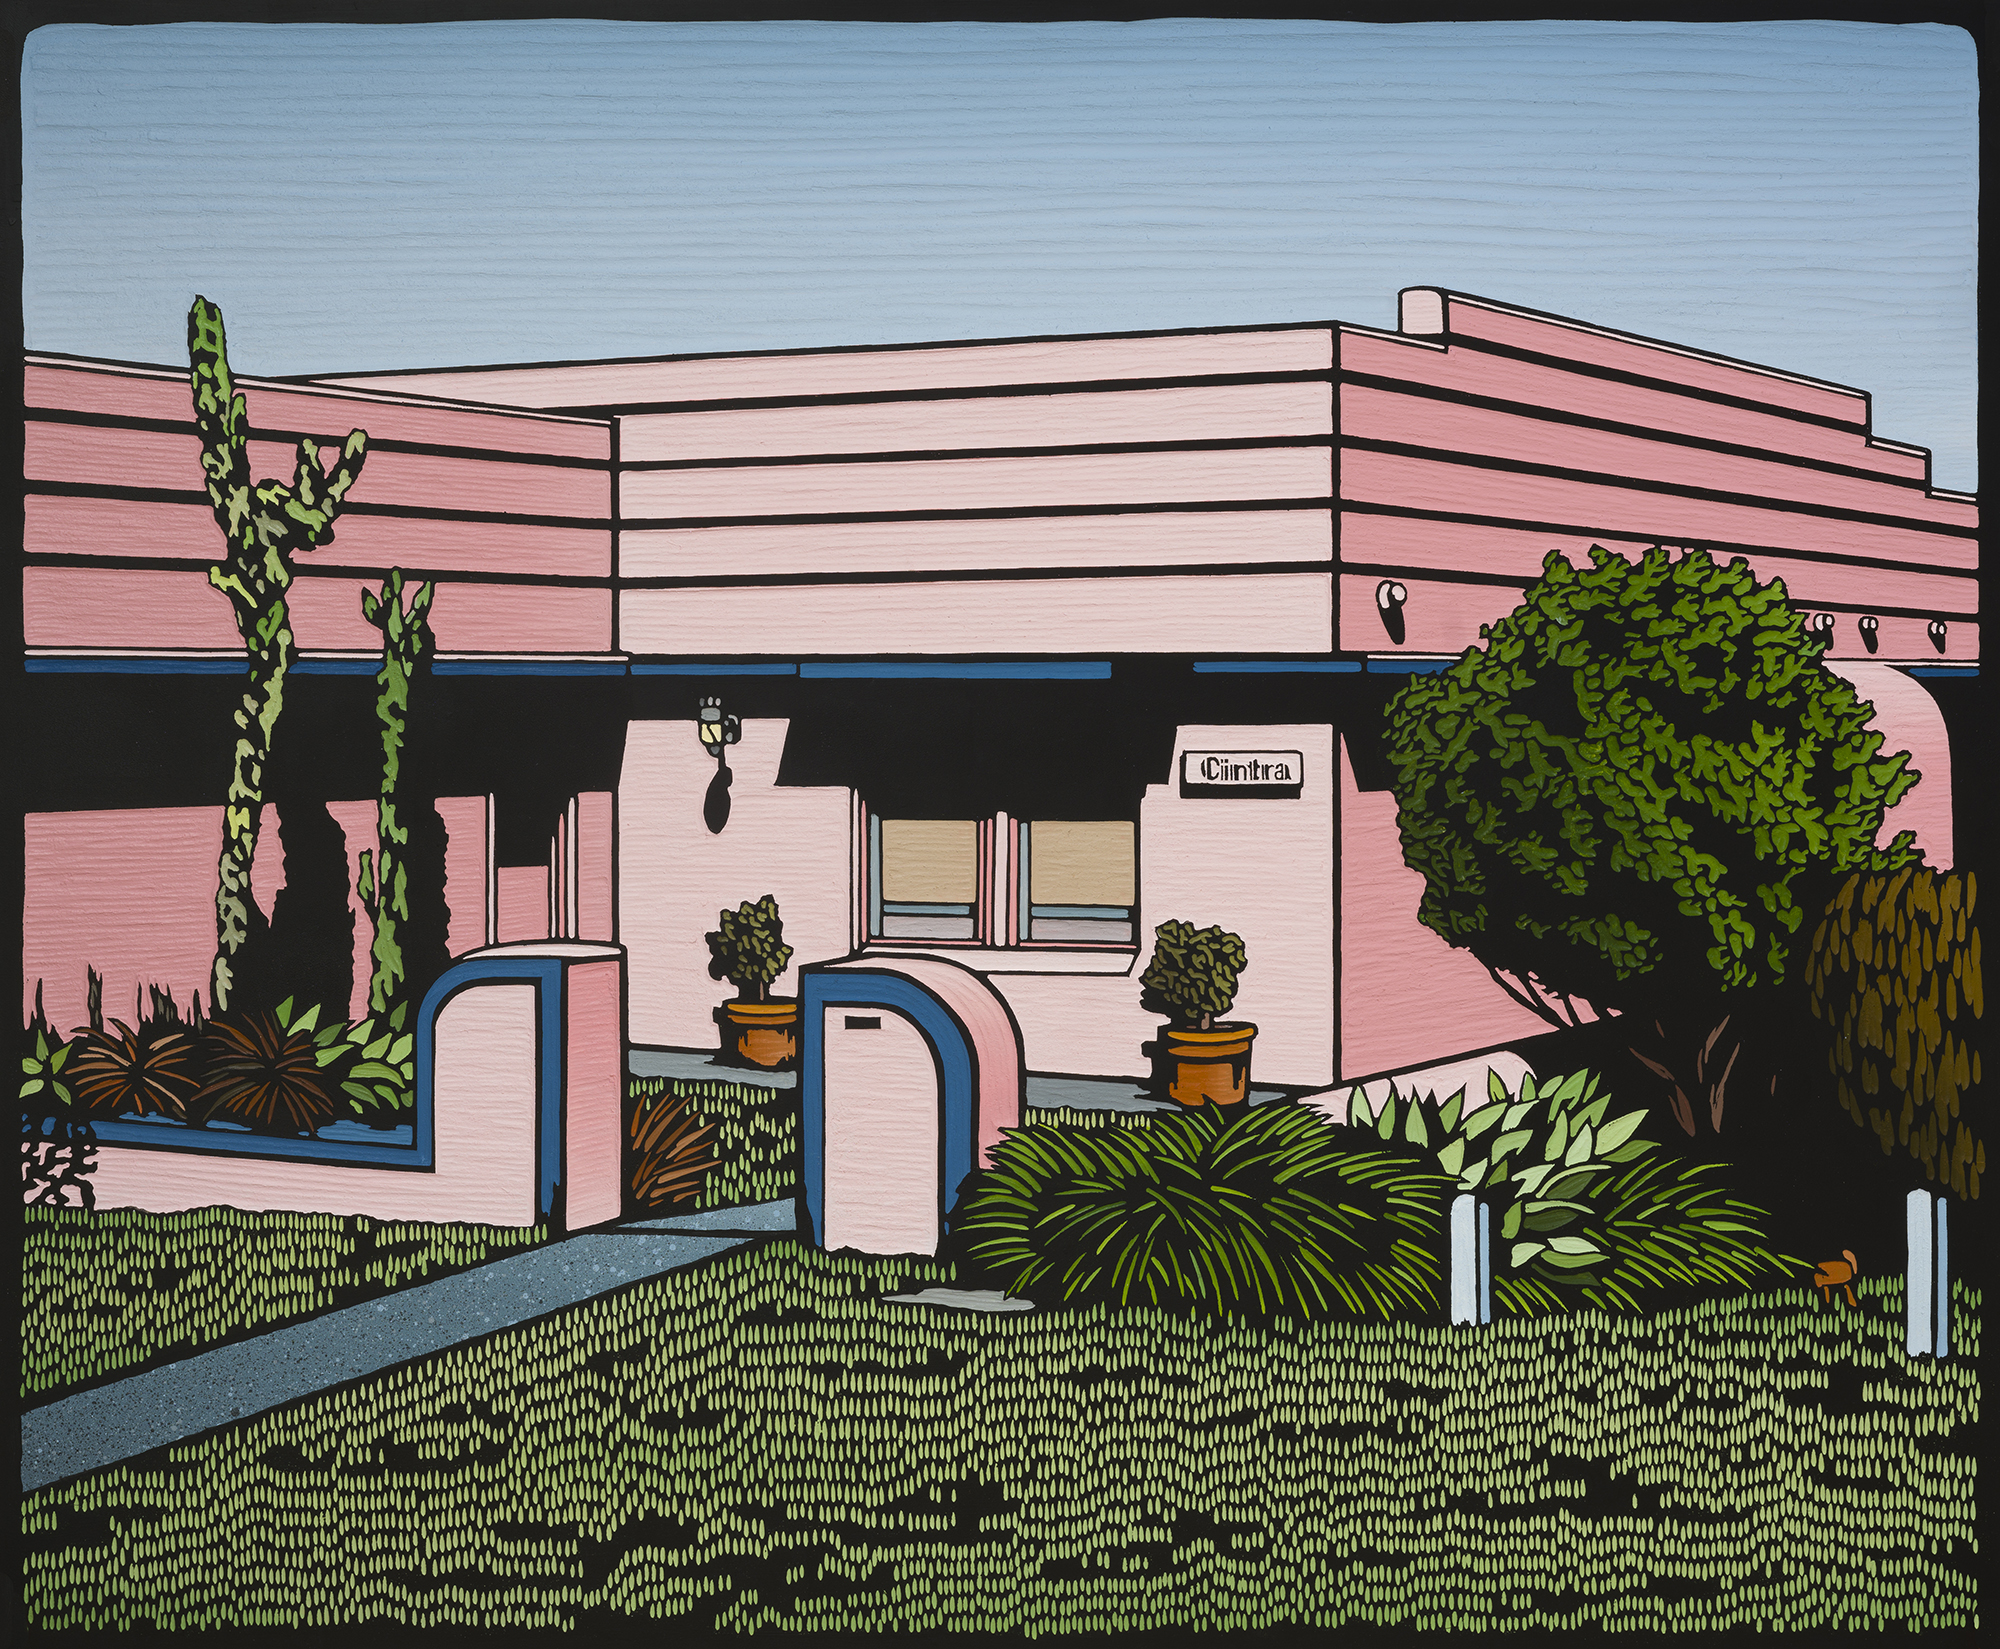 Artwork by Christopher Zanko showing the exterior of an art deco home.